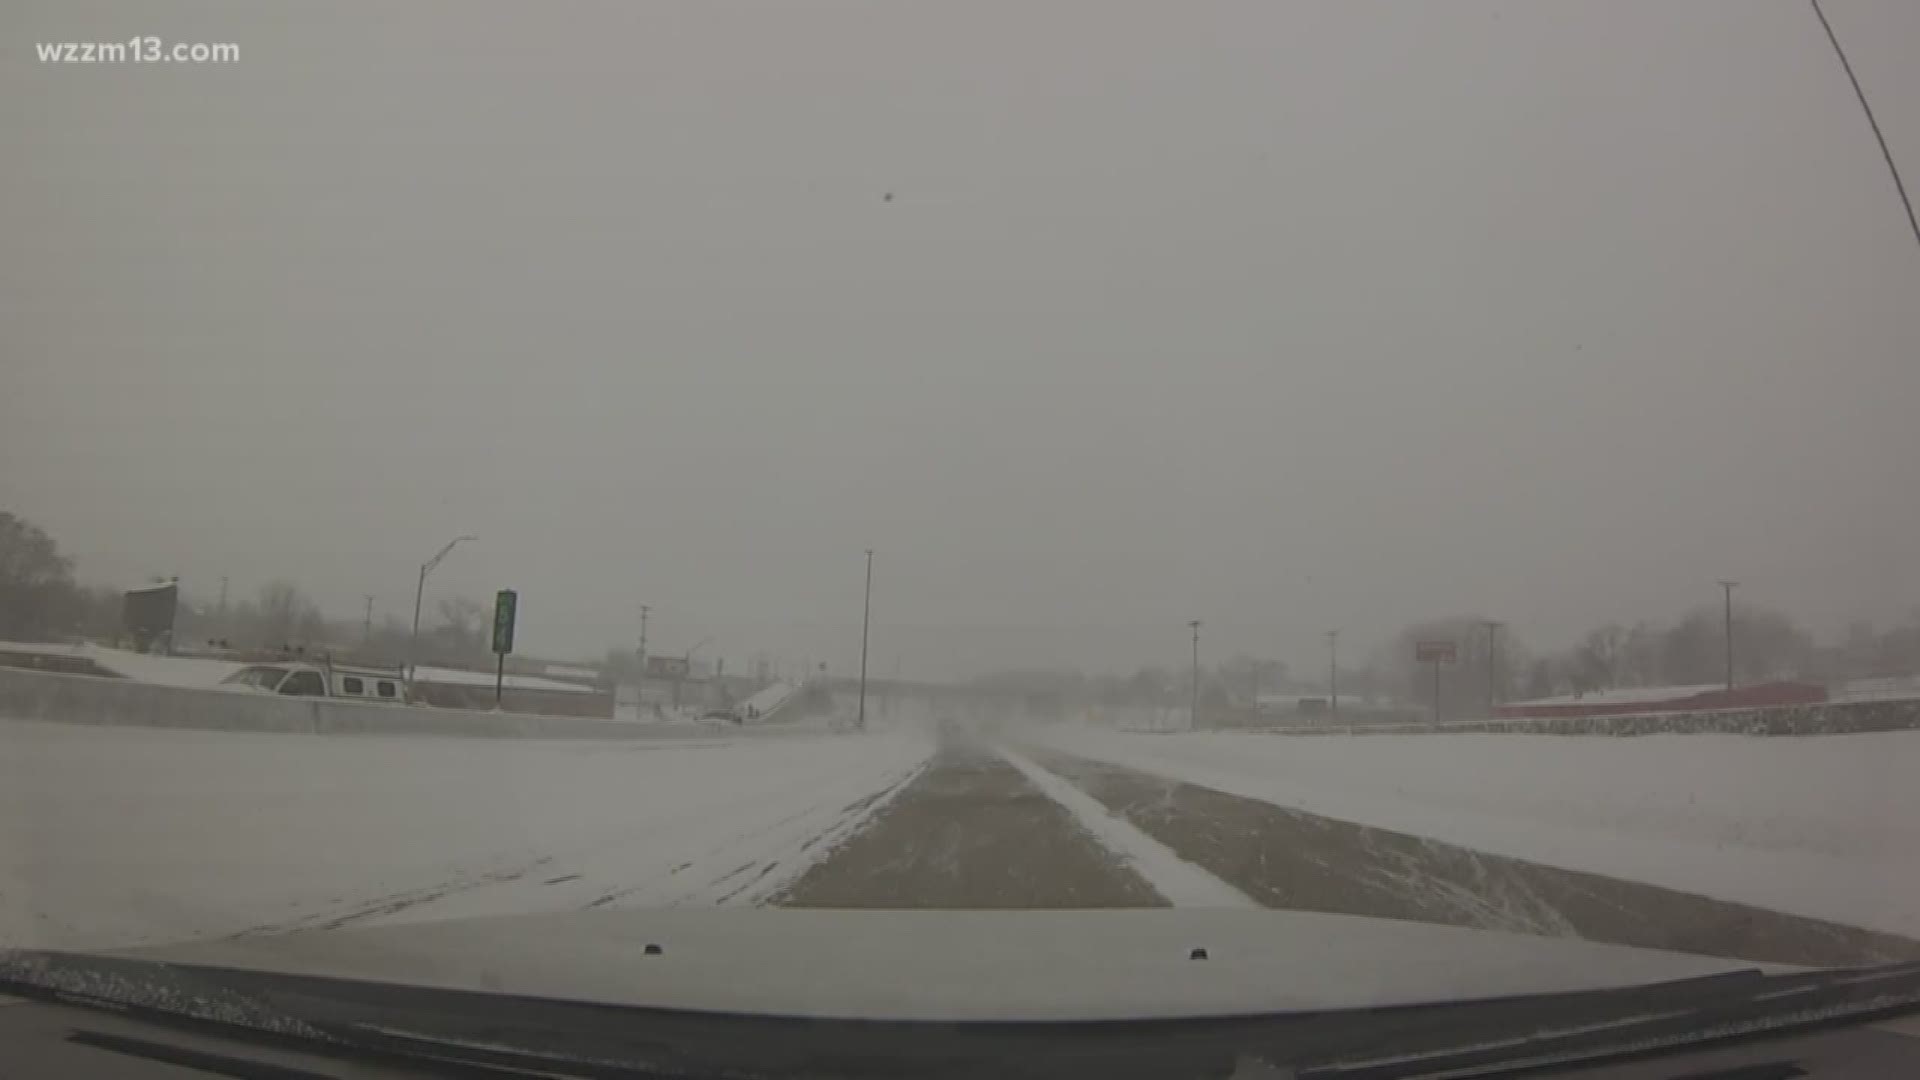 Kylie Ambu shares a live look of the roads in West Michigan.